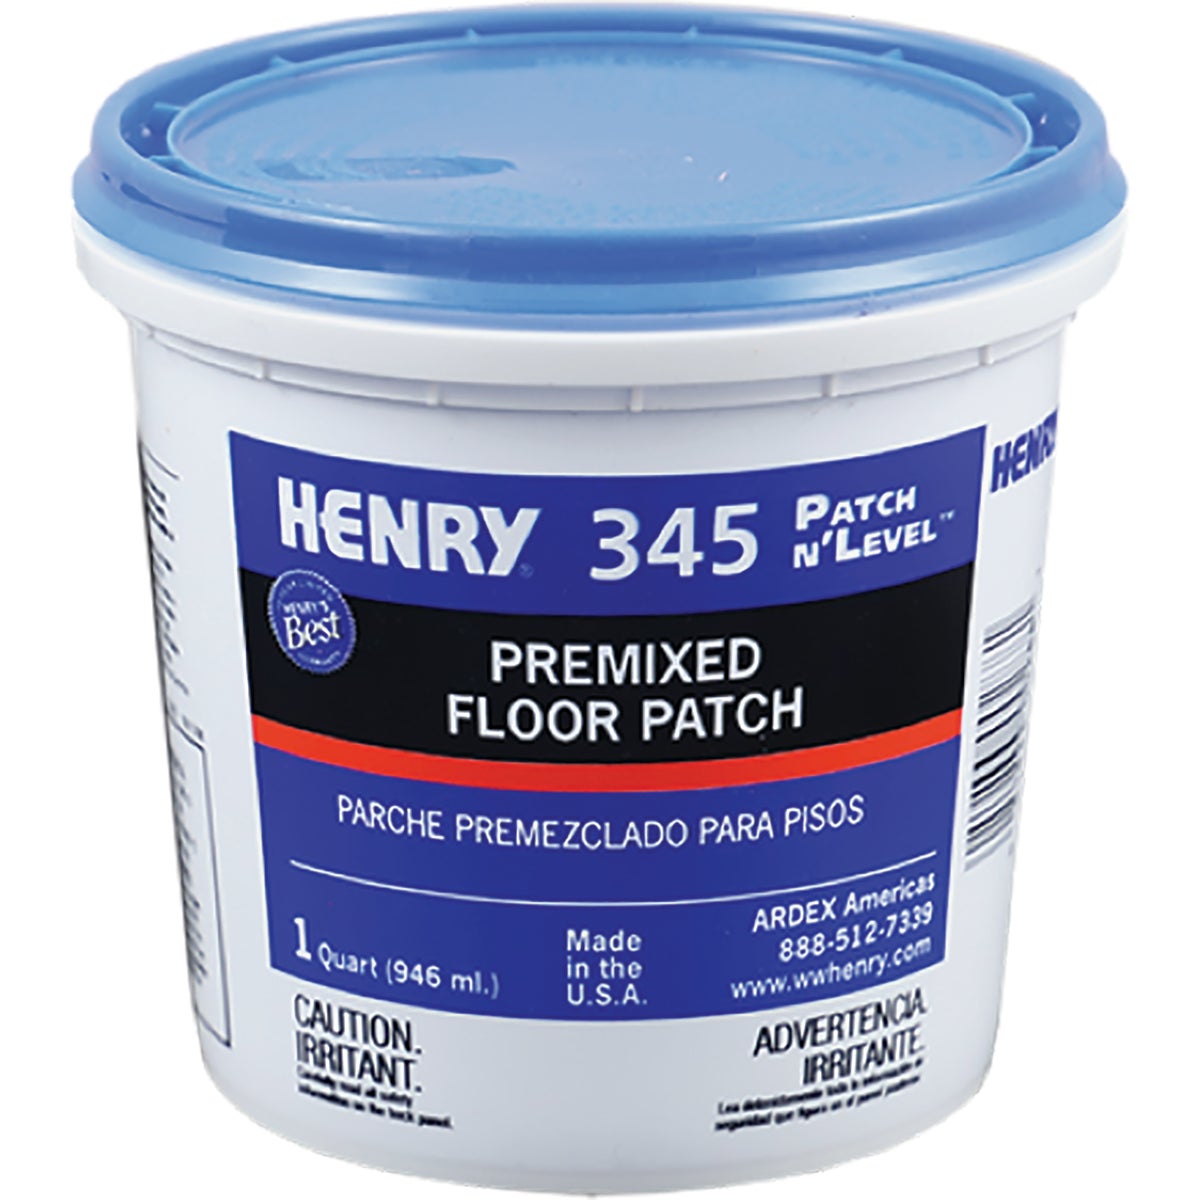 Henry 345 Premixed Patch n'LEVEL Floor Patch & Smoothing Compound, Gray, 1 Qt.